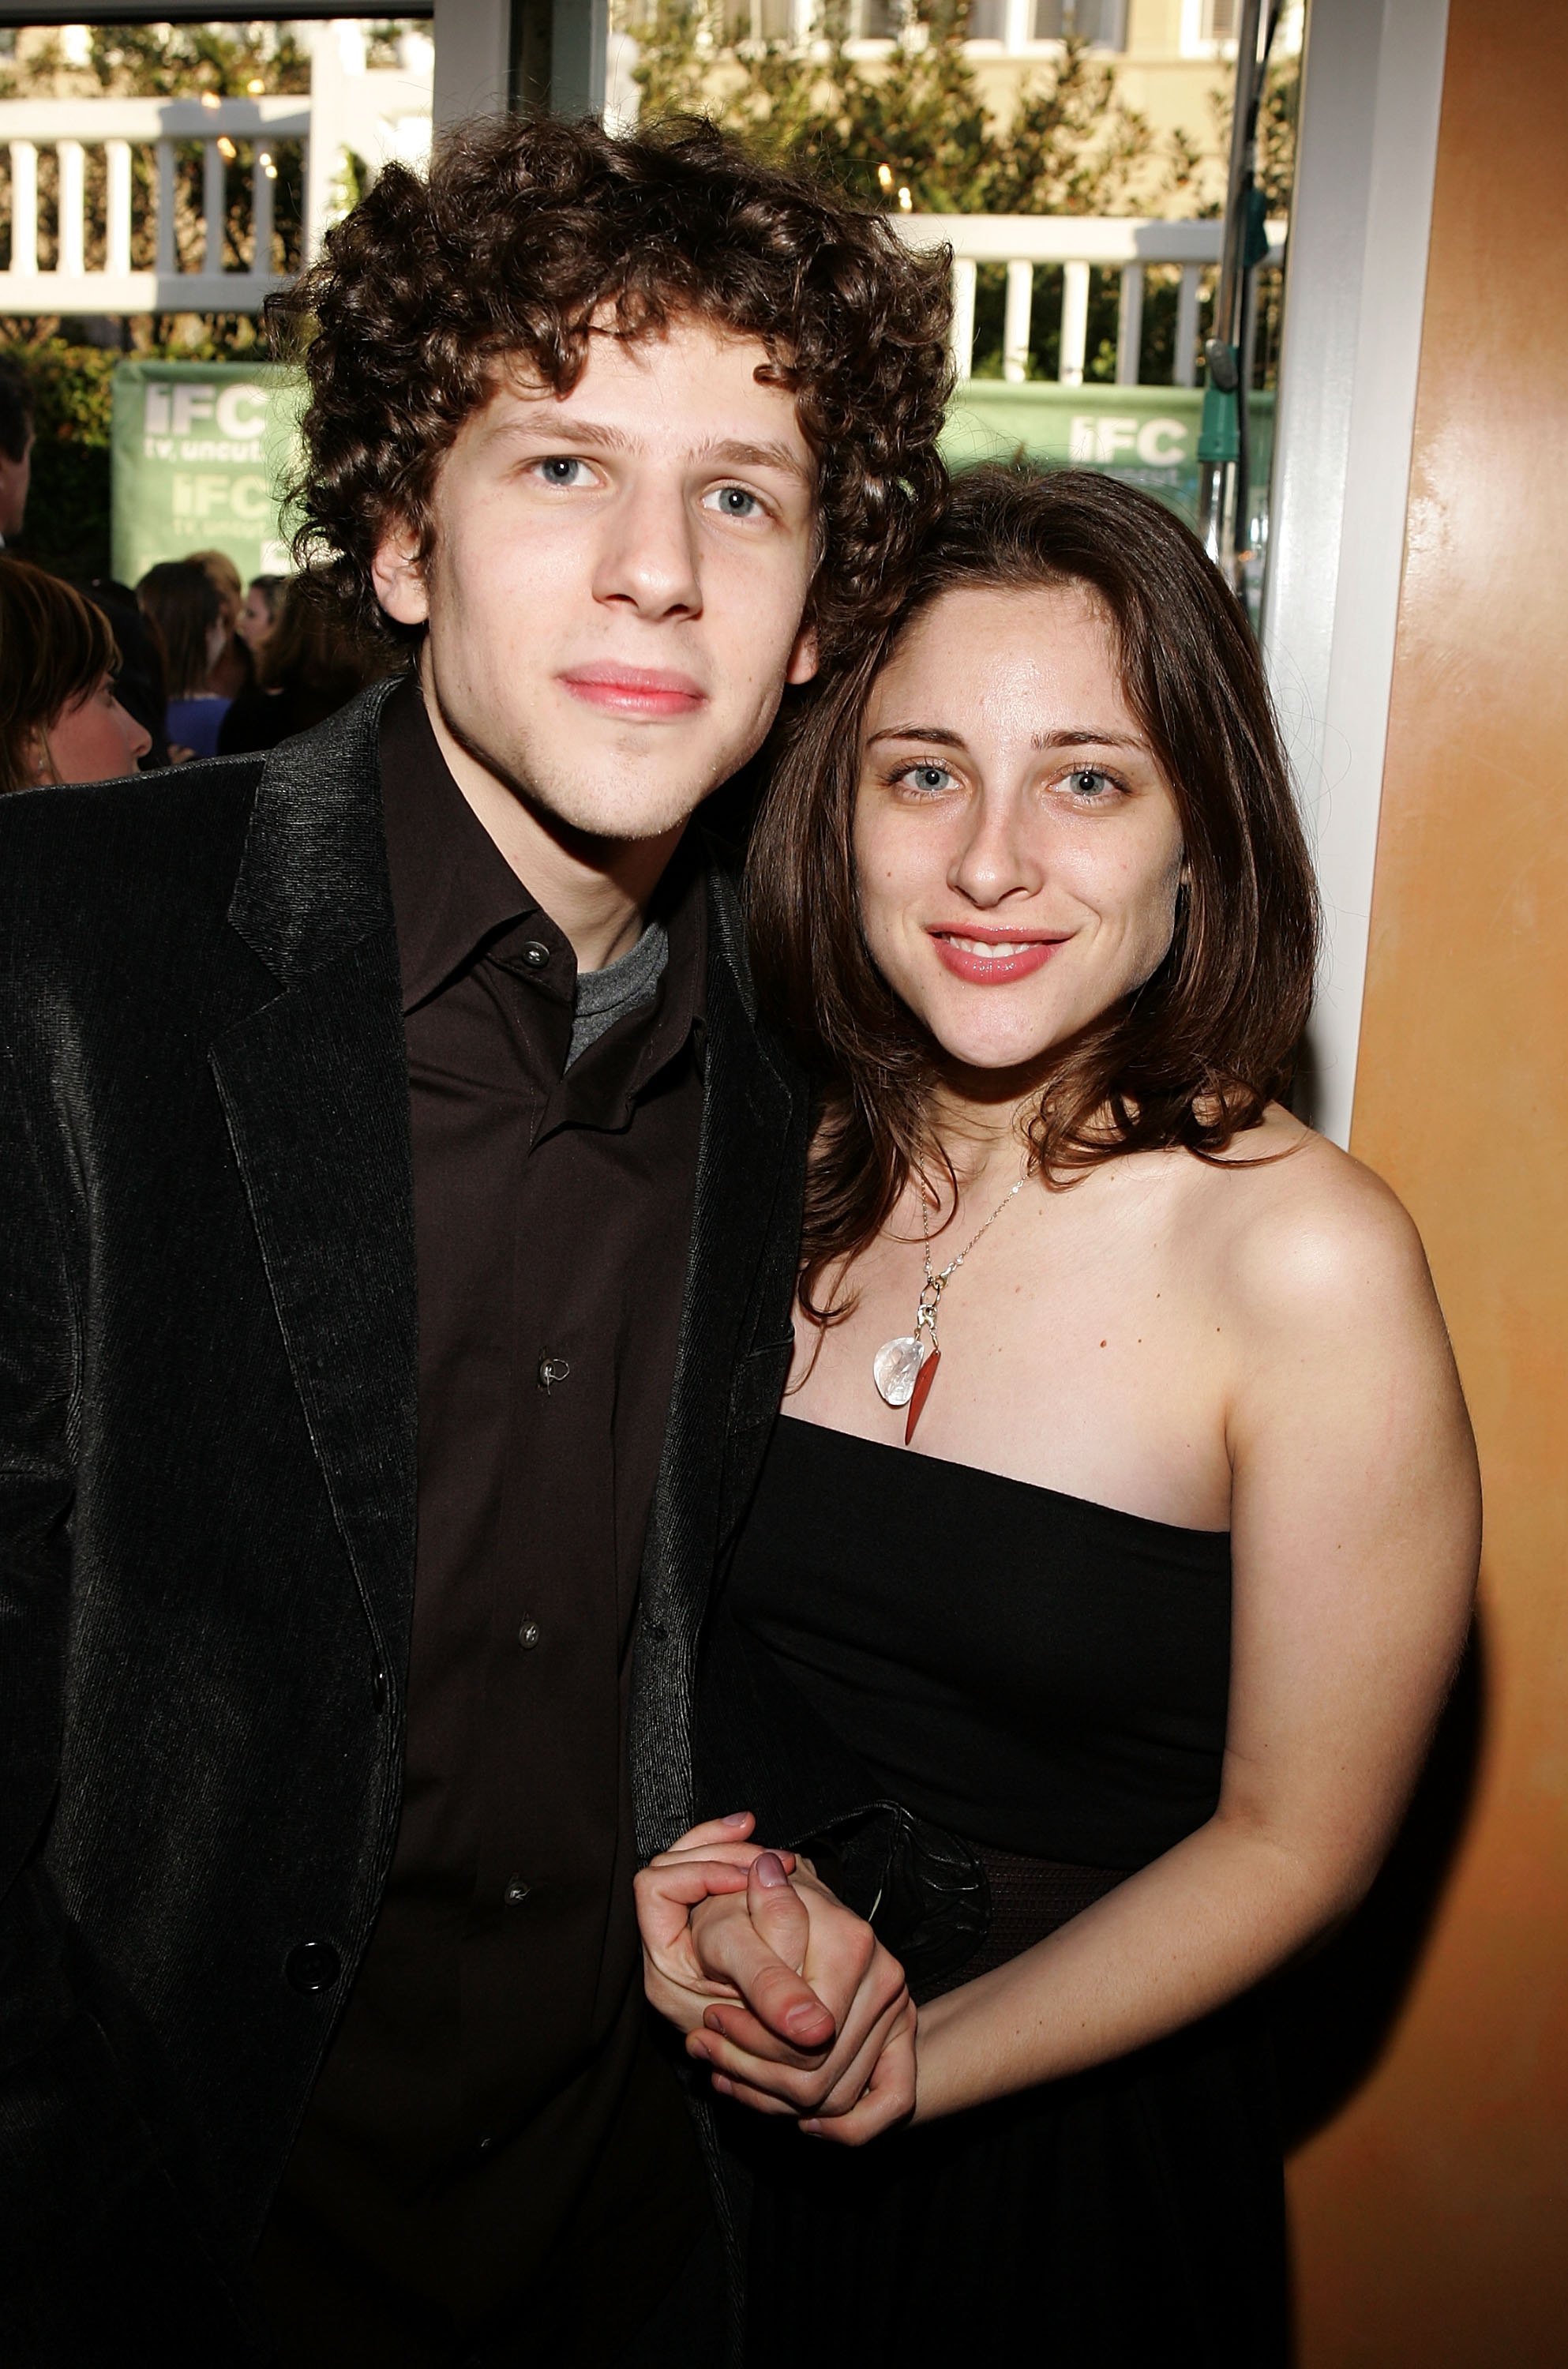 Jesse Eisenberg and Anna Strout during the IFC's Independent Spirit Awards After Party held at Shutters Hotel, on March 4, 2005 in Santa Monica, California. | Source: Getty Images